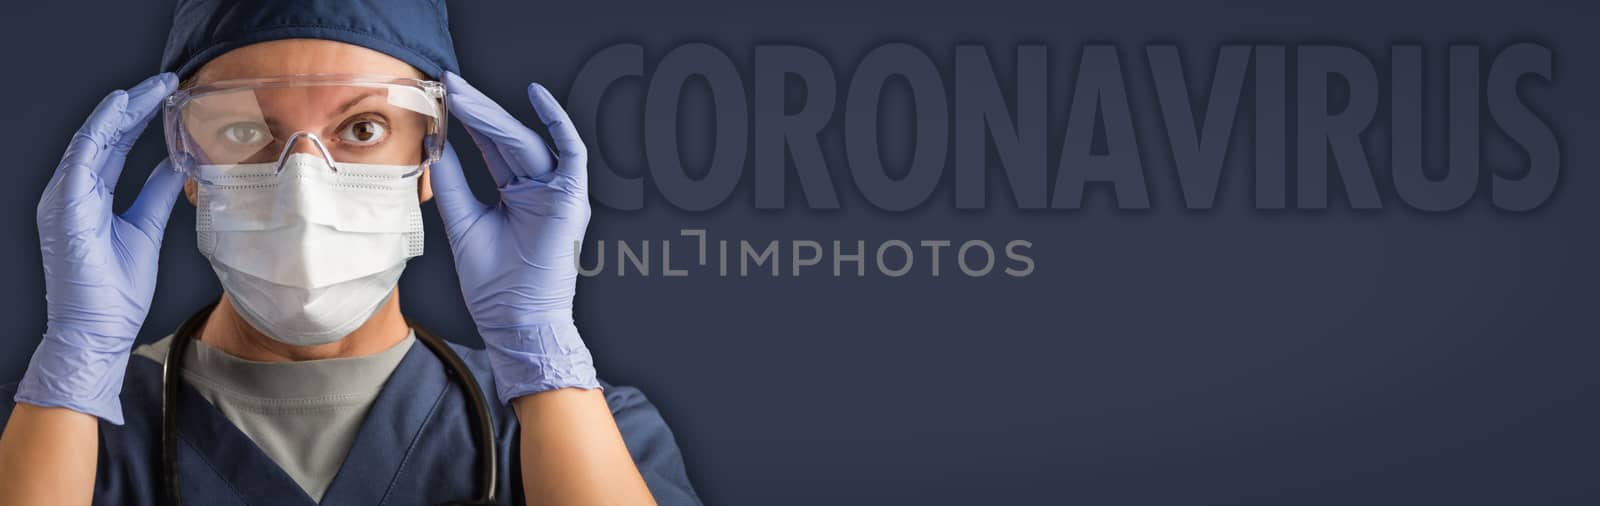 Banner of Female Doctor or Nurse In Medical Face Mask and Protective Gear With Coronavirus Text Behind. by Feverpitched